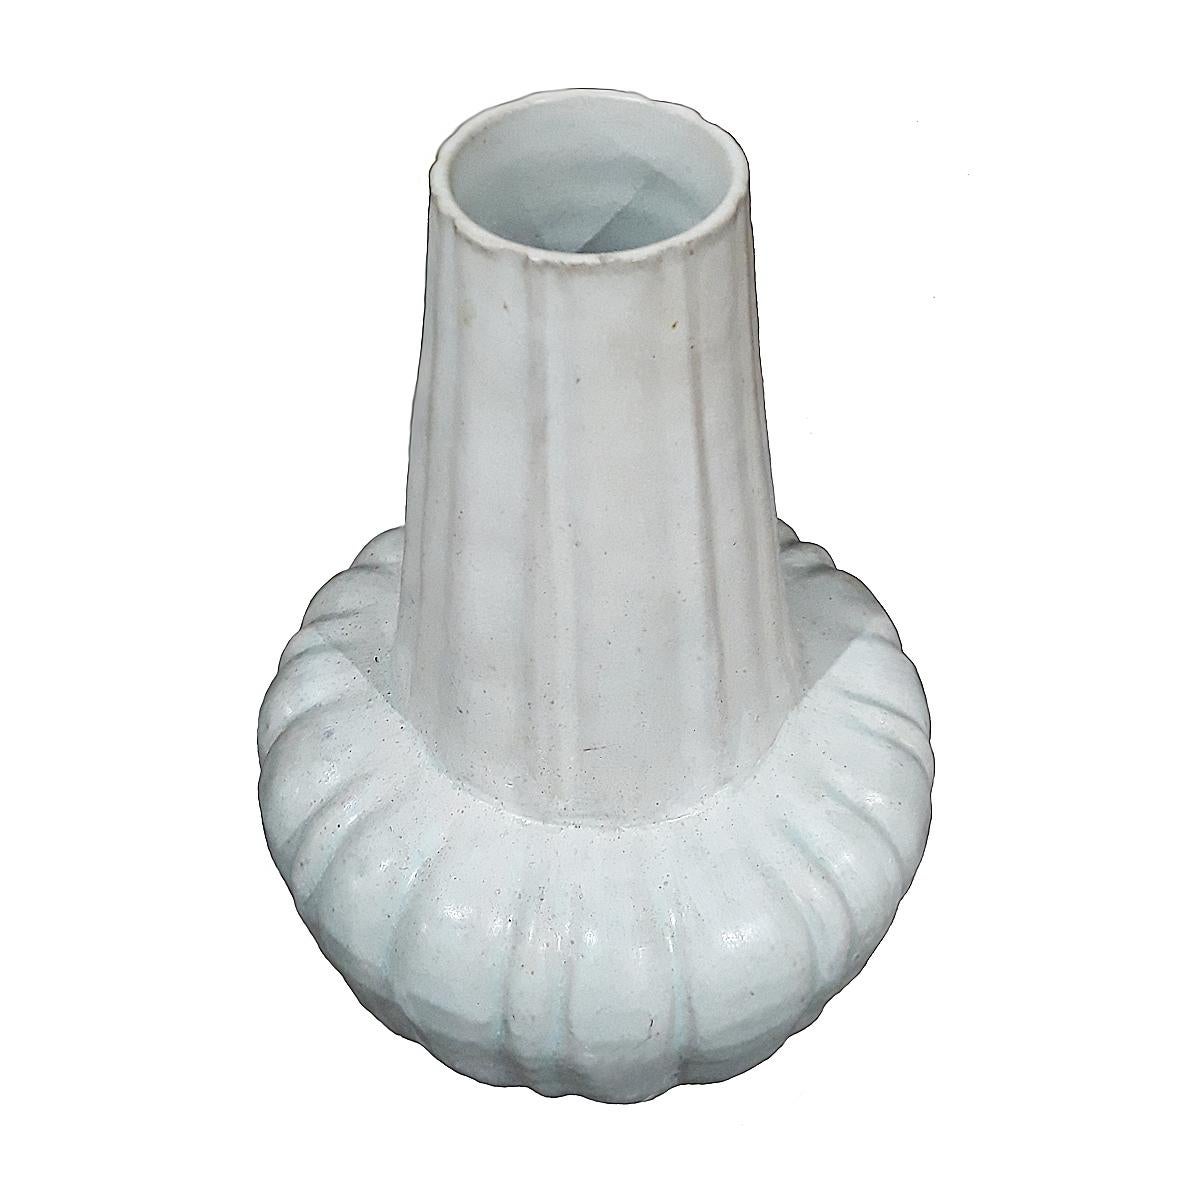 A white ceramic vase from Thailand, circa 1950. 
Gloss white finish, flower-shaped and tapered neck.